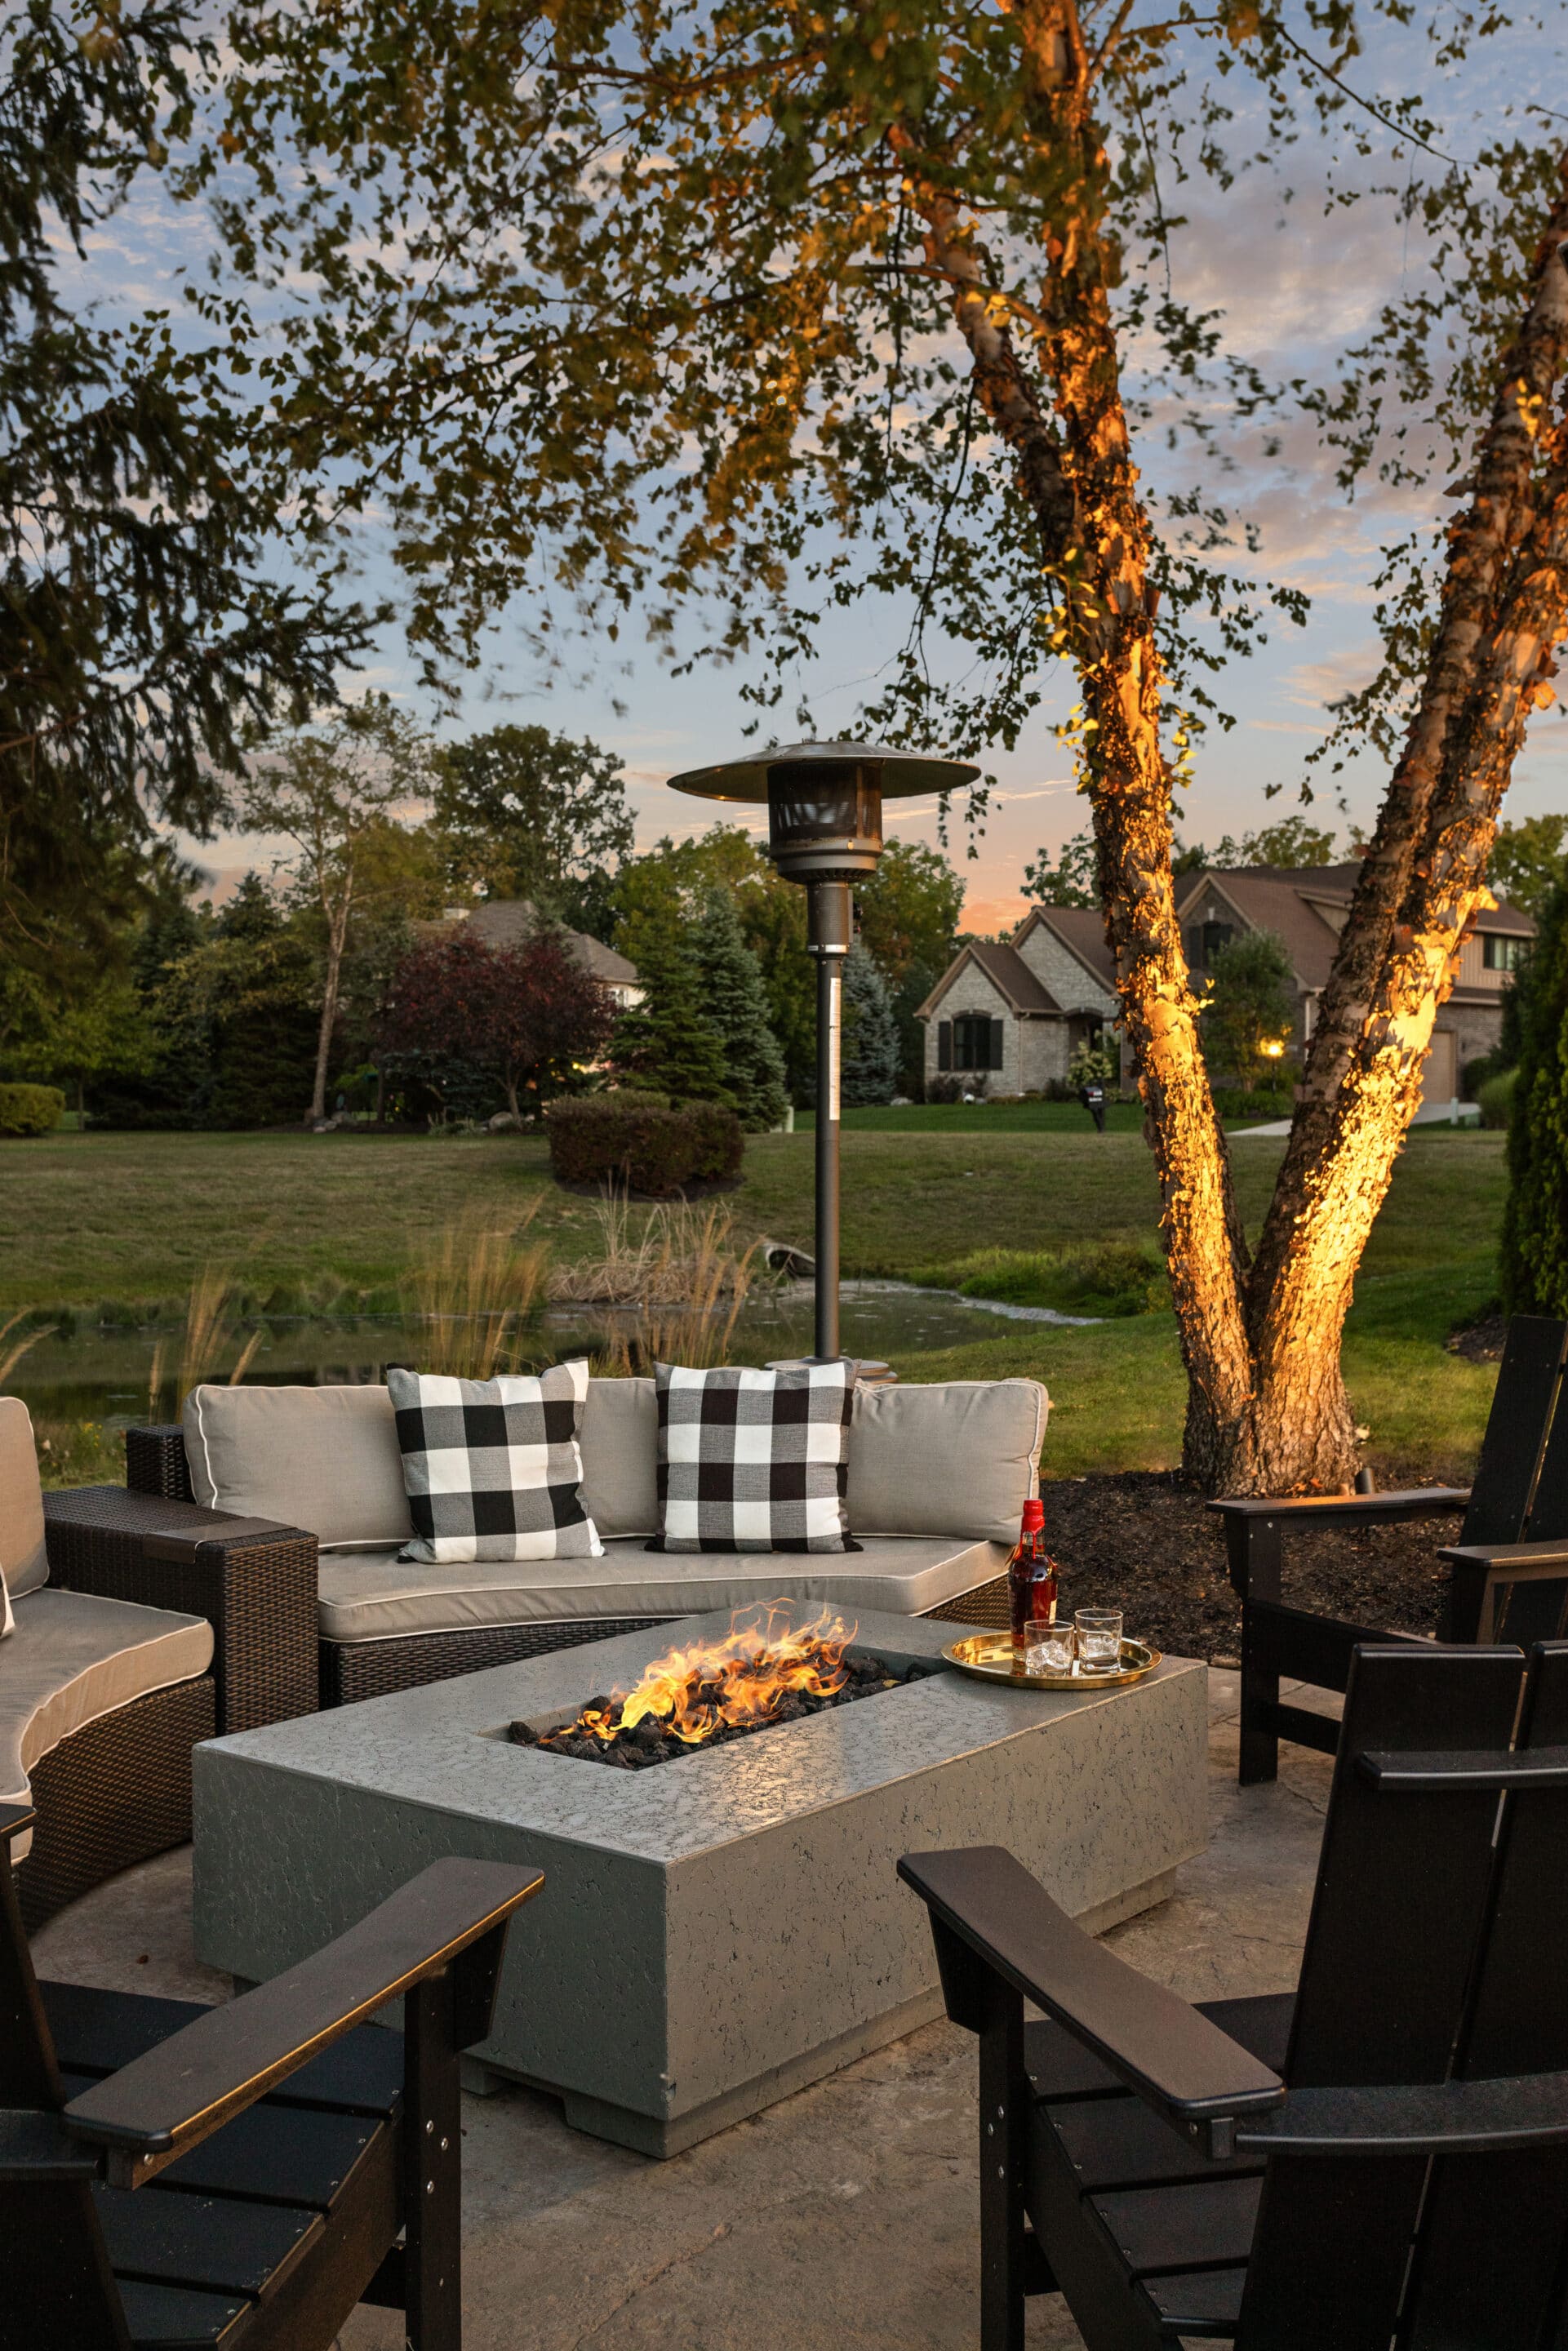 Outdoor fire feature surrounded by seating in a backyard.